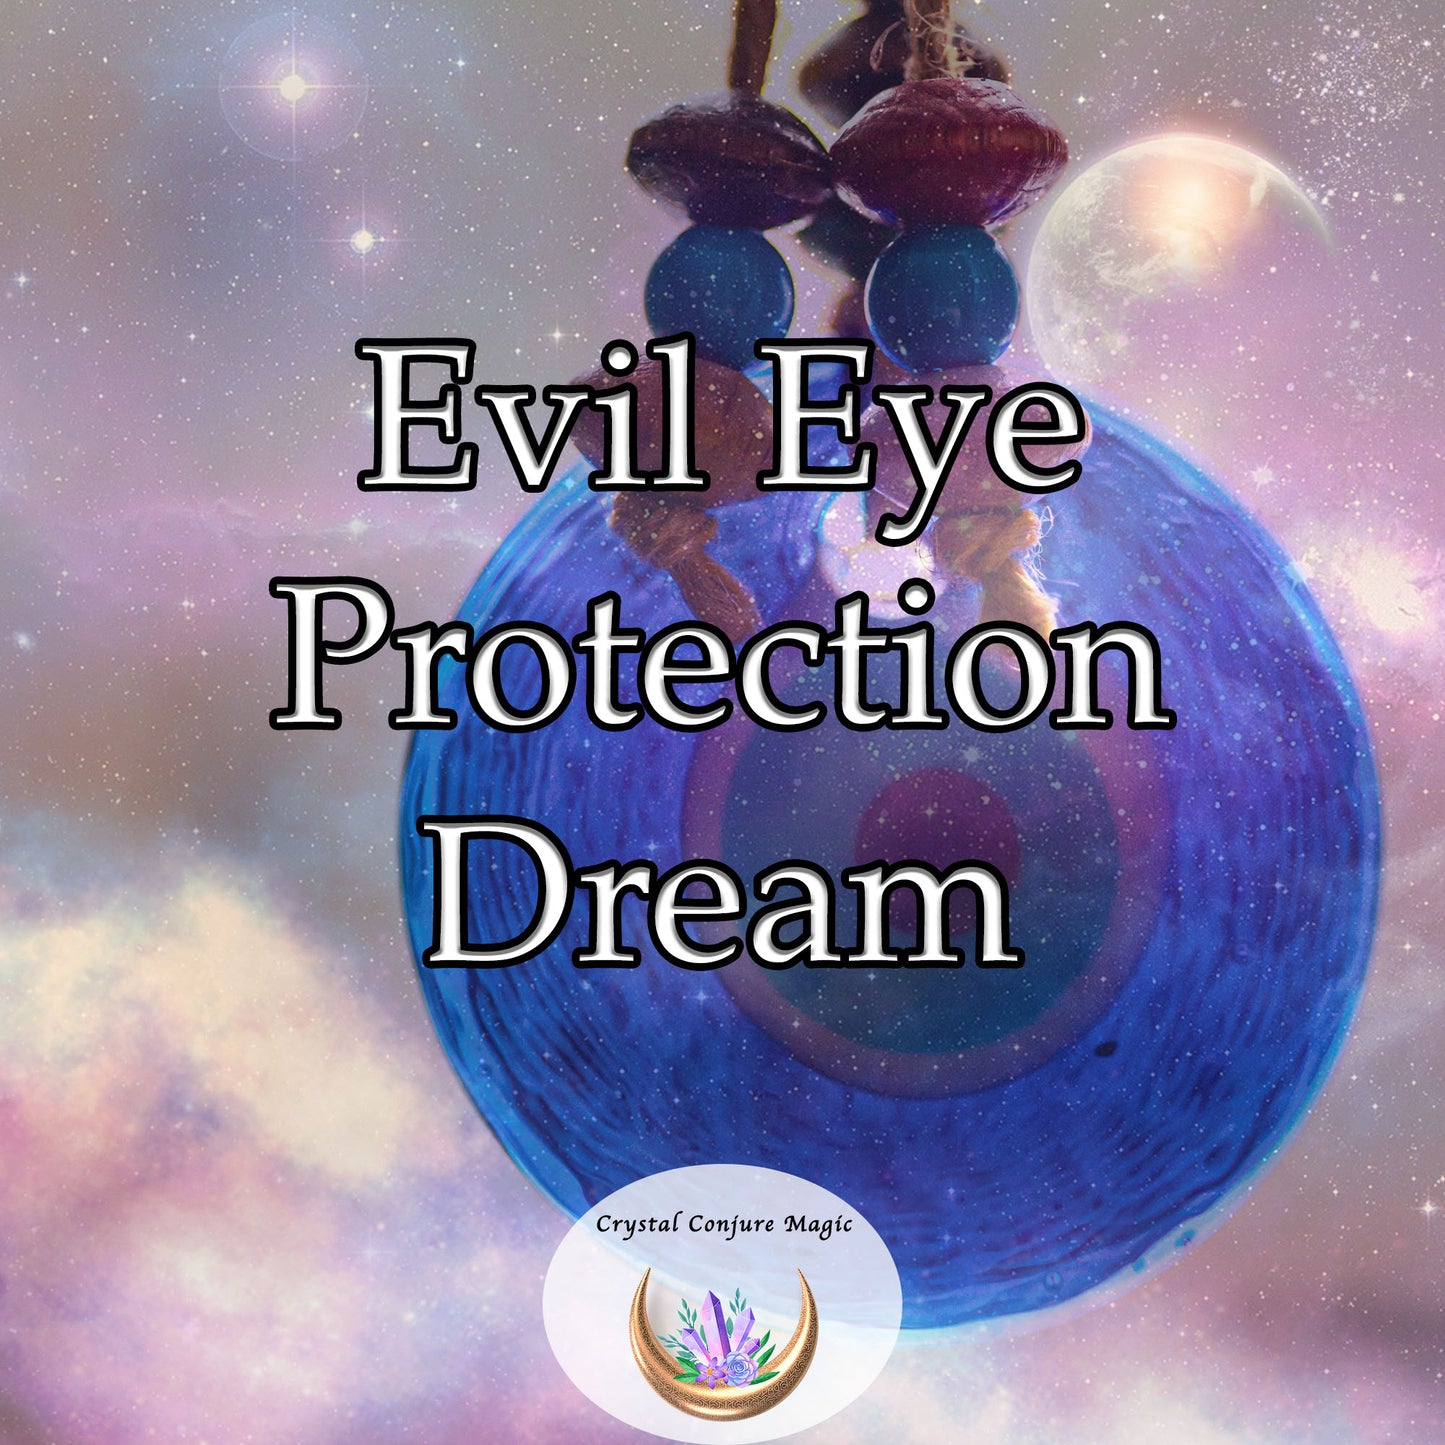 Evil Eye Protection Dream - an invisible shield, warding off negative energies and ill-intentioned thoughts